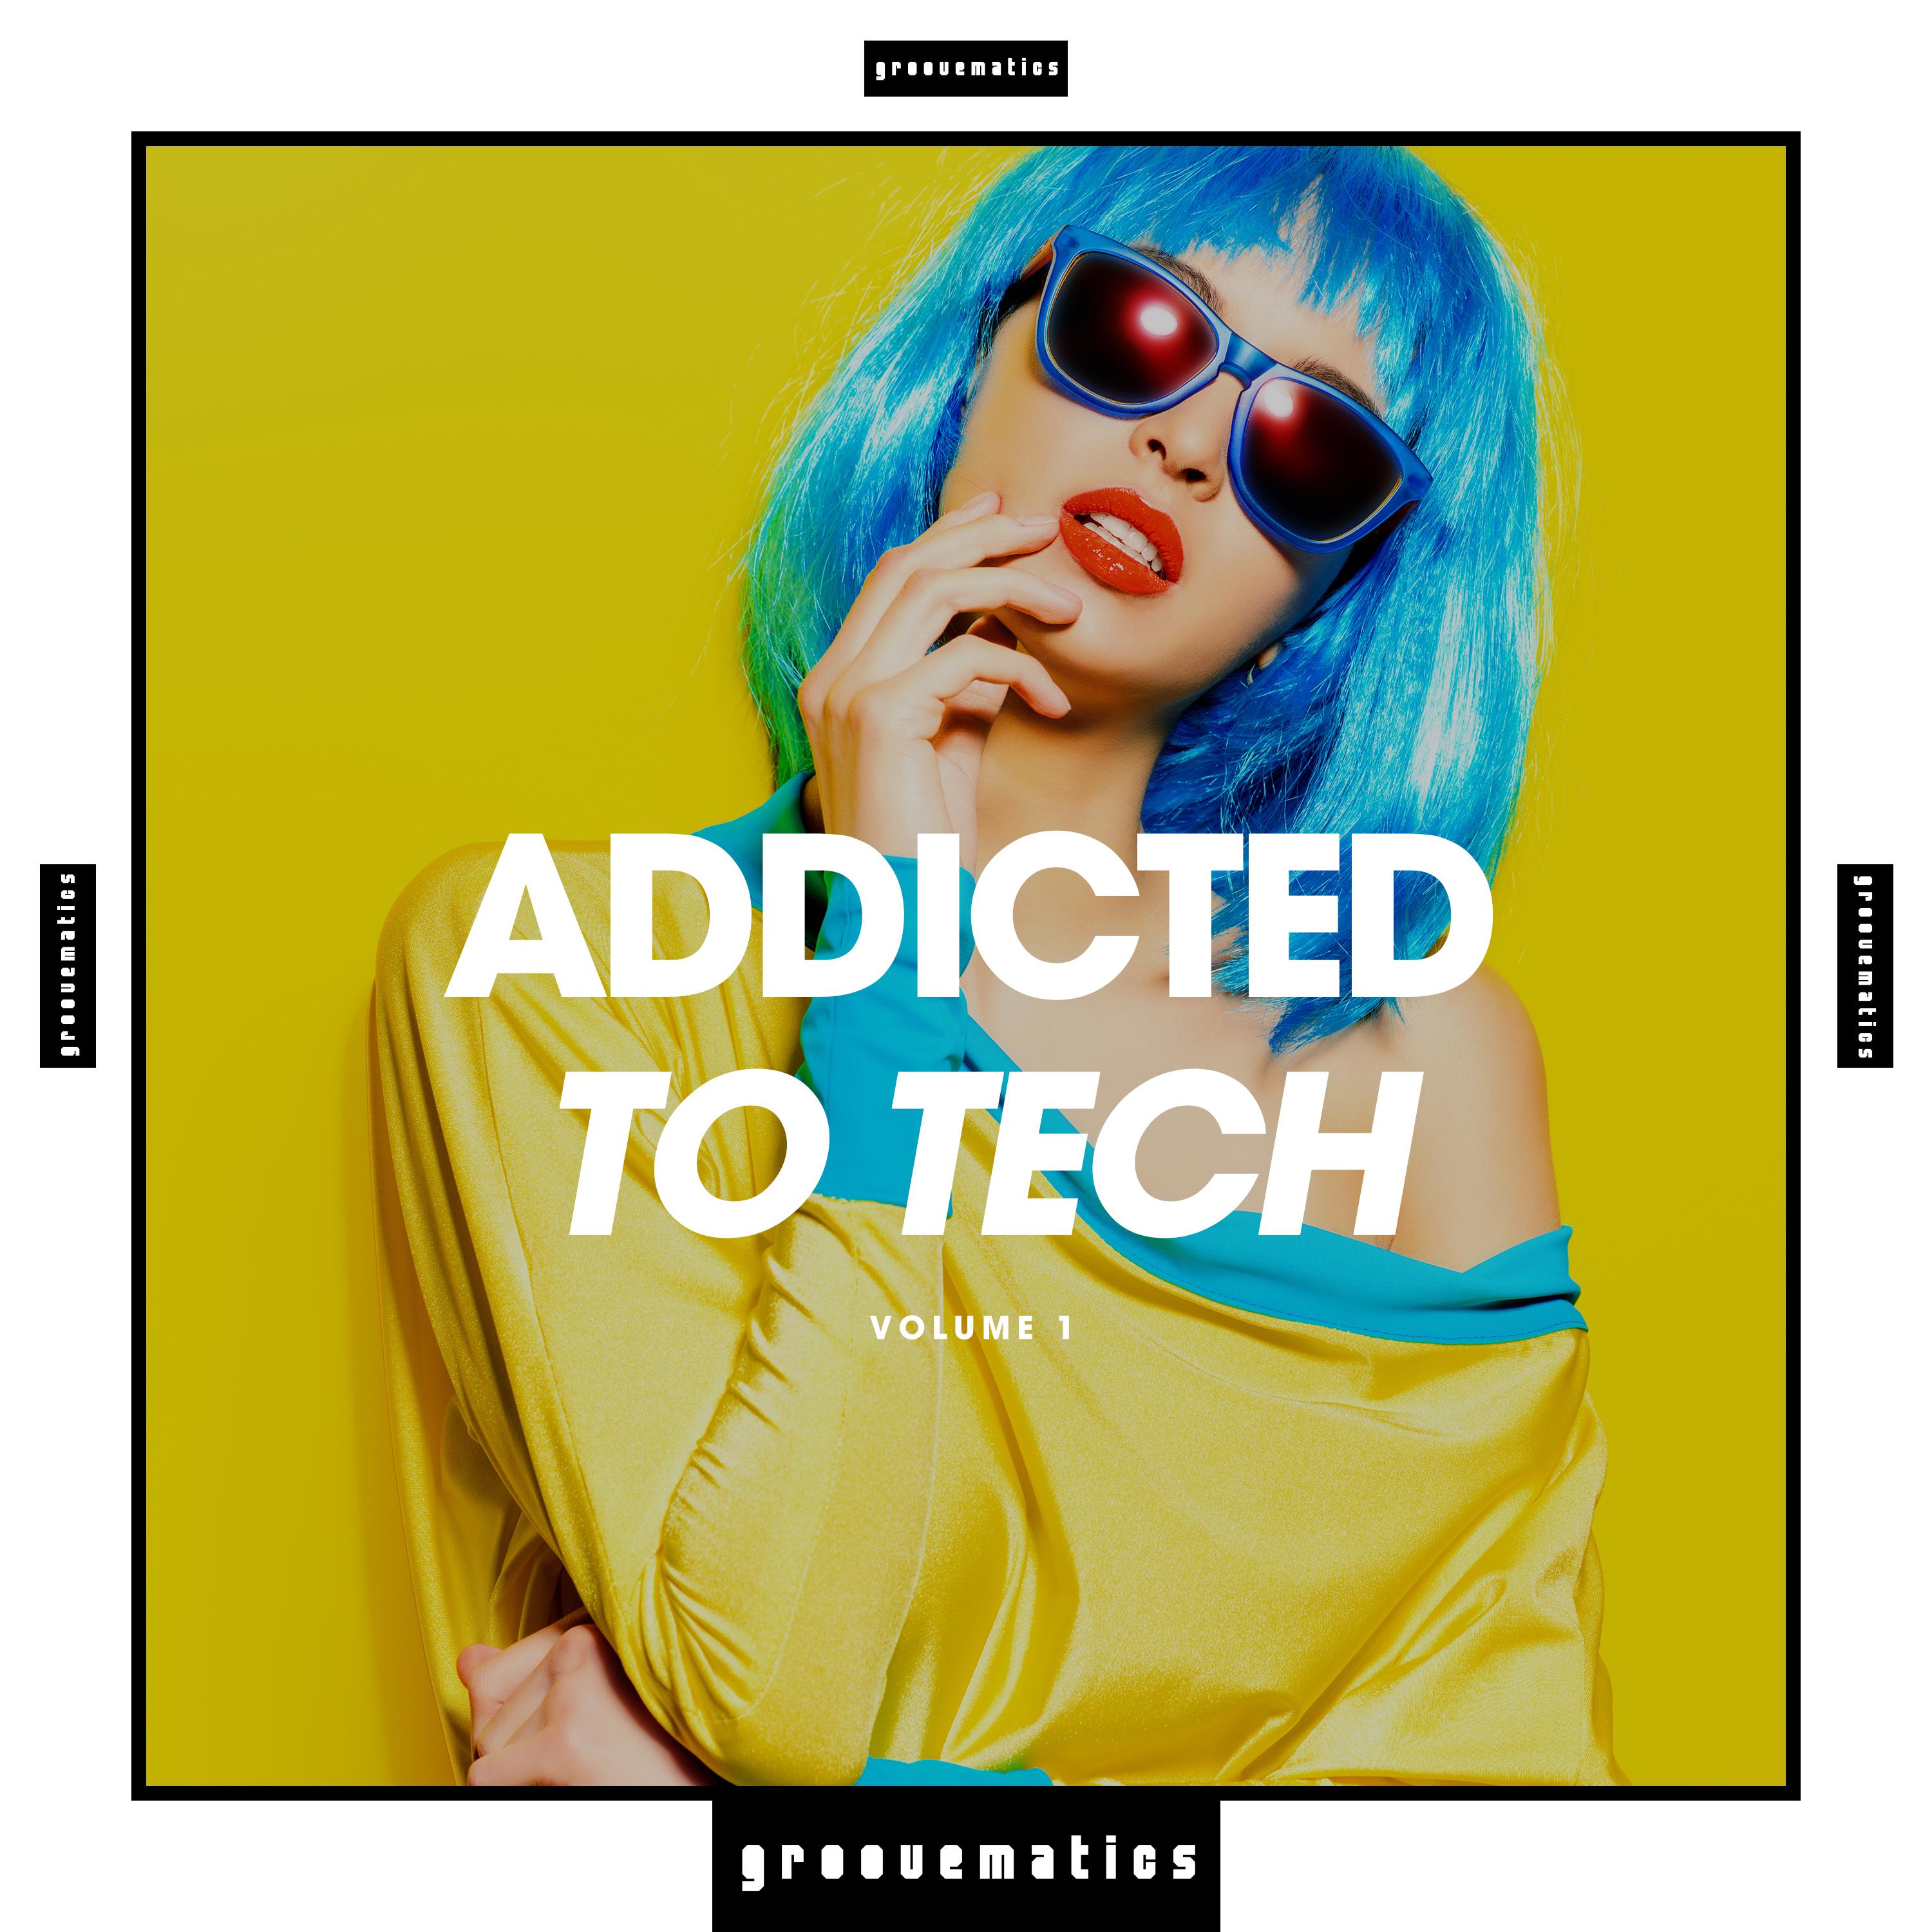 Addicted to Tech, Vol. 1